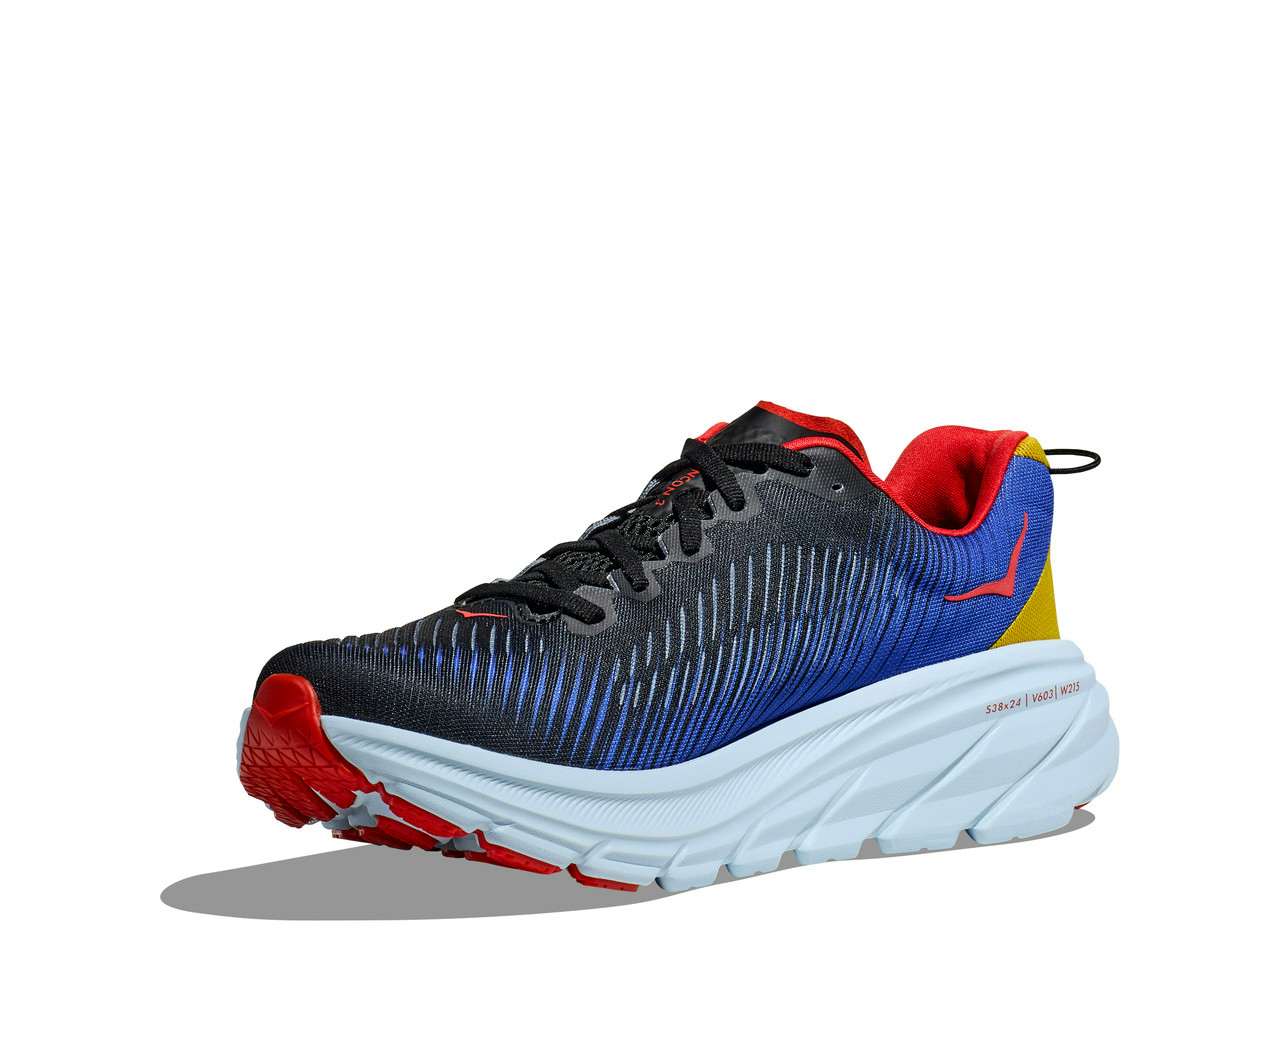 Rincon 3 Road Running Shoes Black/Dazzling Blue